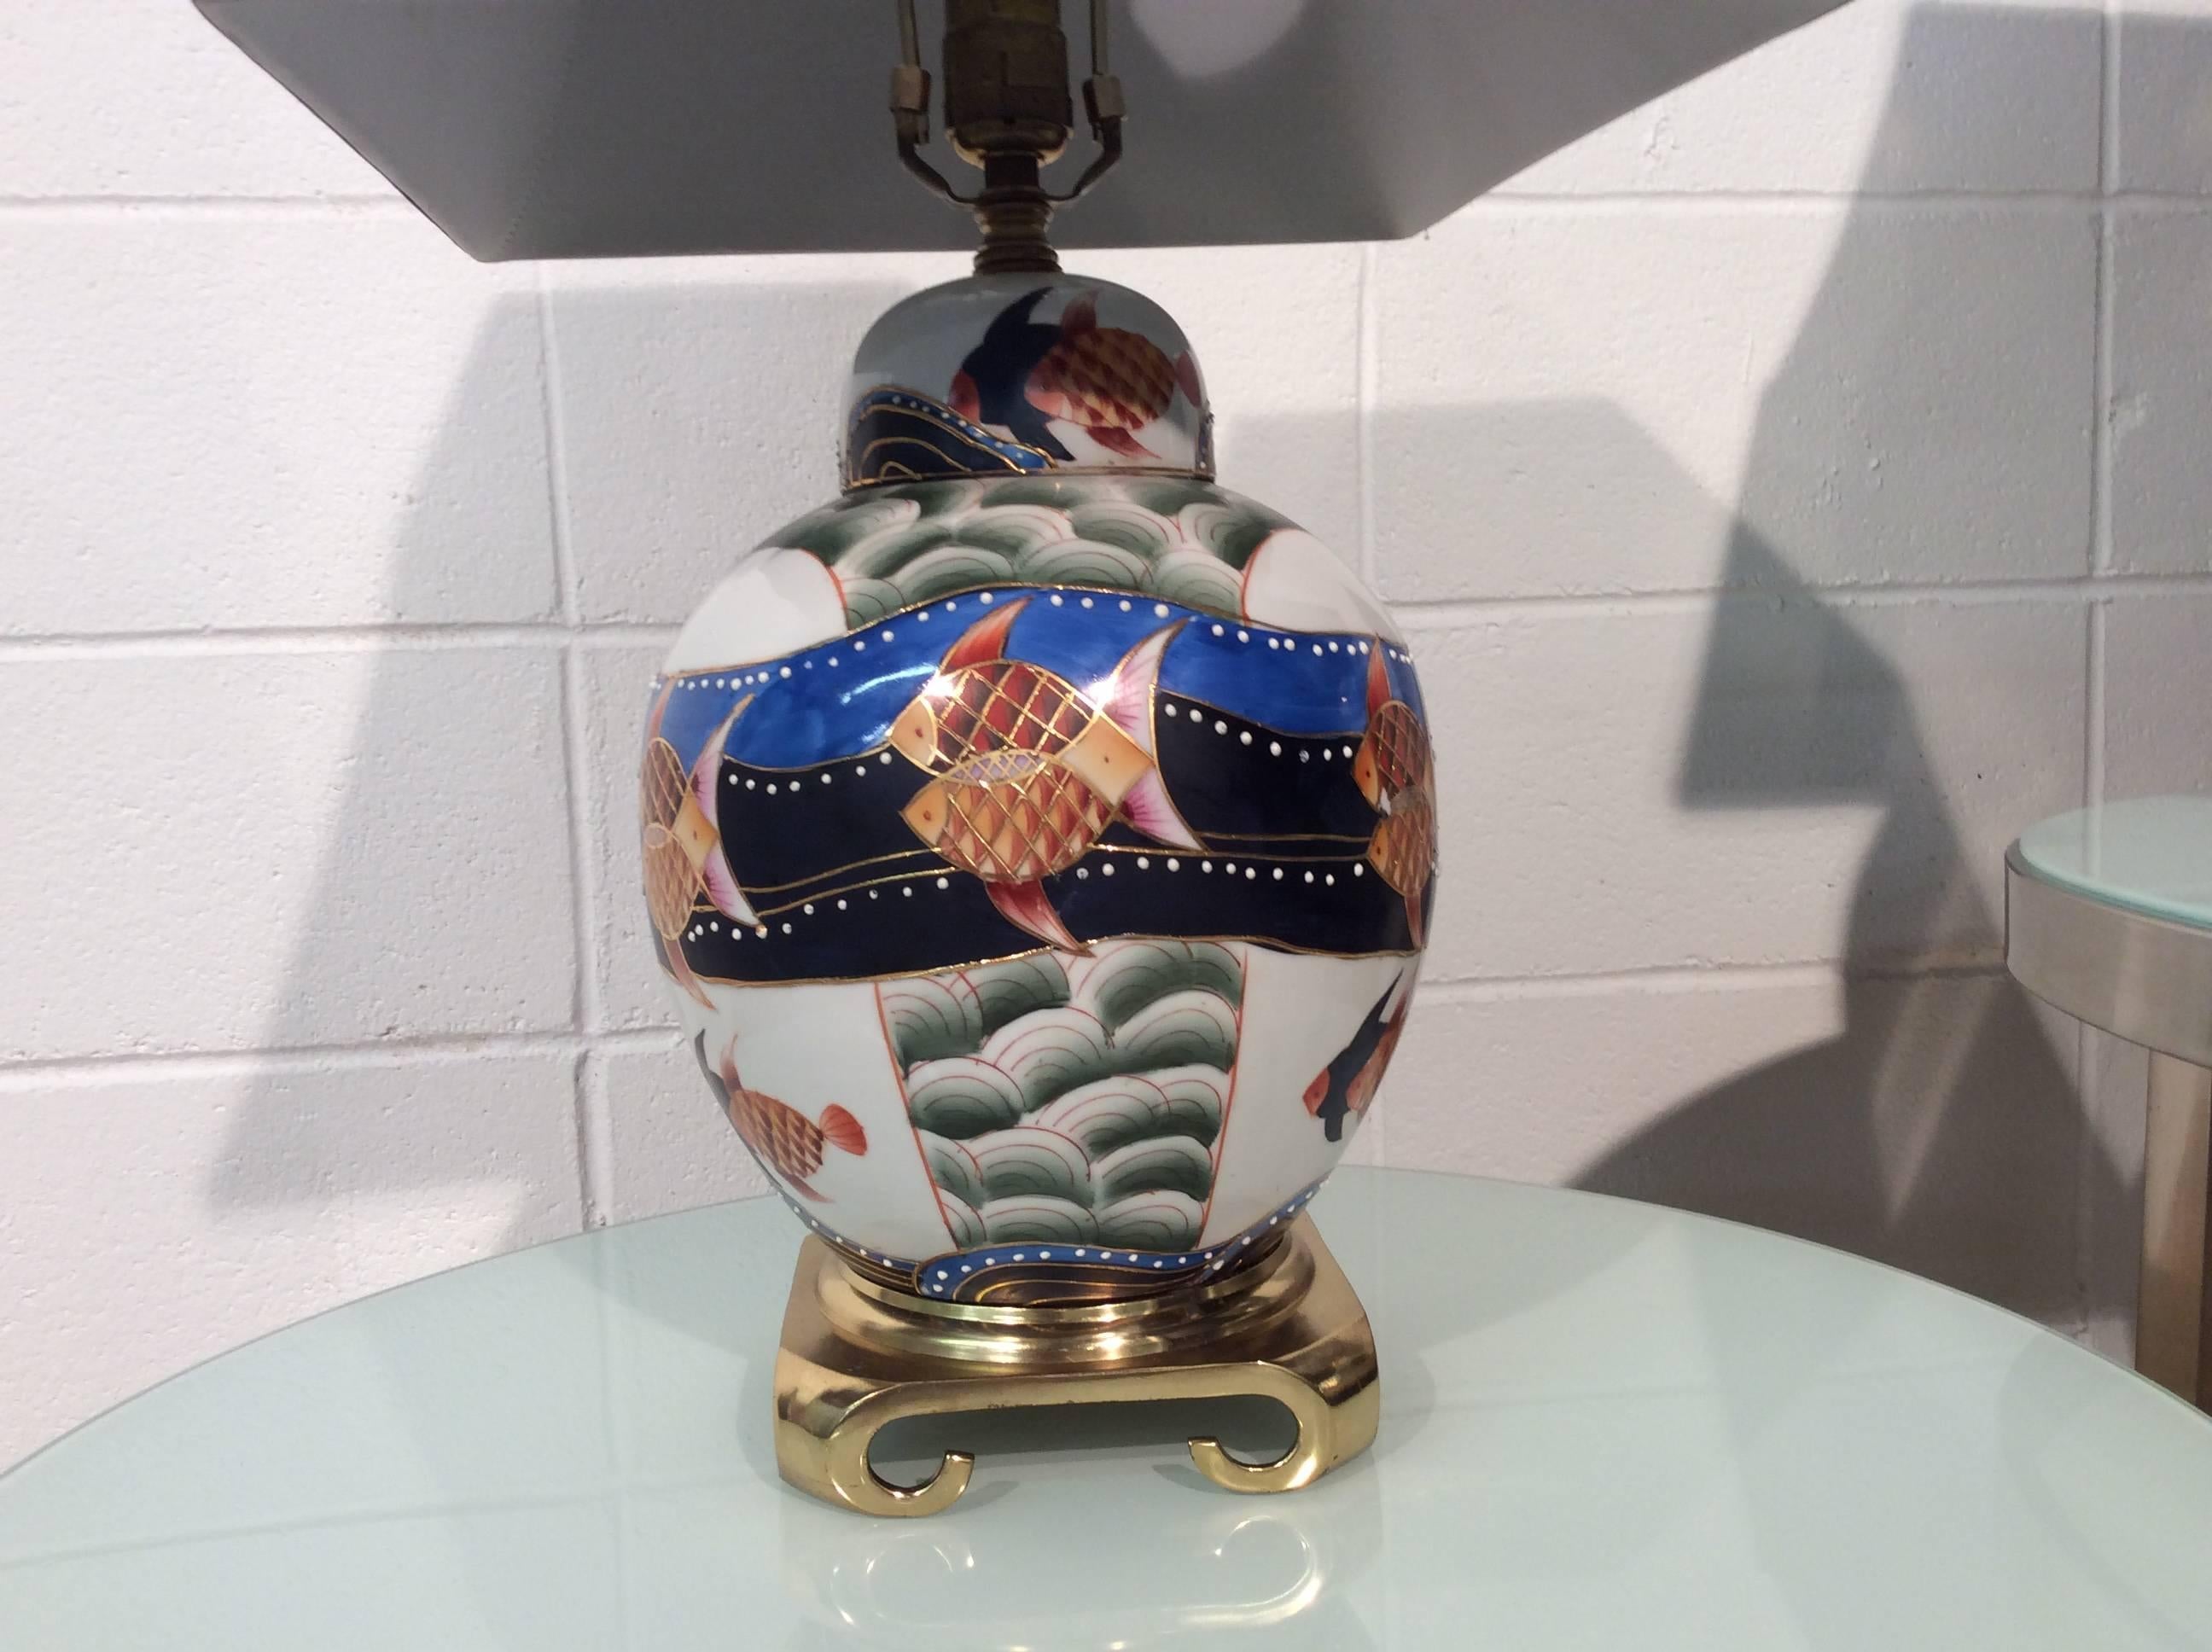 Excellent pair of Asian lamps featuring hand-painted Koi fish. Very bold and vivid in color. The wiring and sockets and are safe and in perfect working order. About 1/2